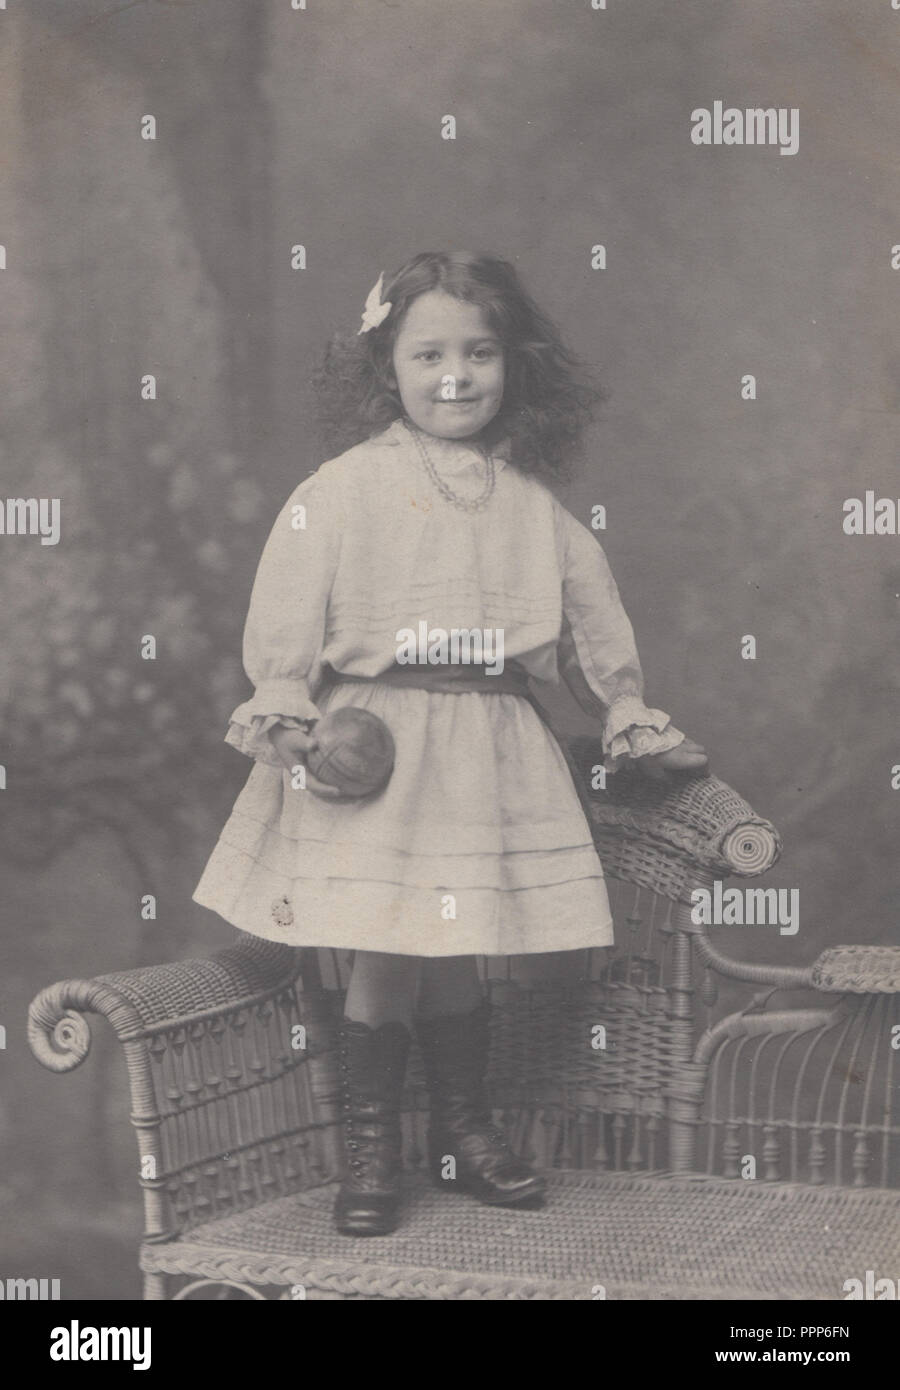 Vintage Southport Studio Photograph of a Young Girl Stood on a Wicker Chair Holding a Small Ball Stock Photo